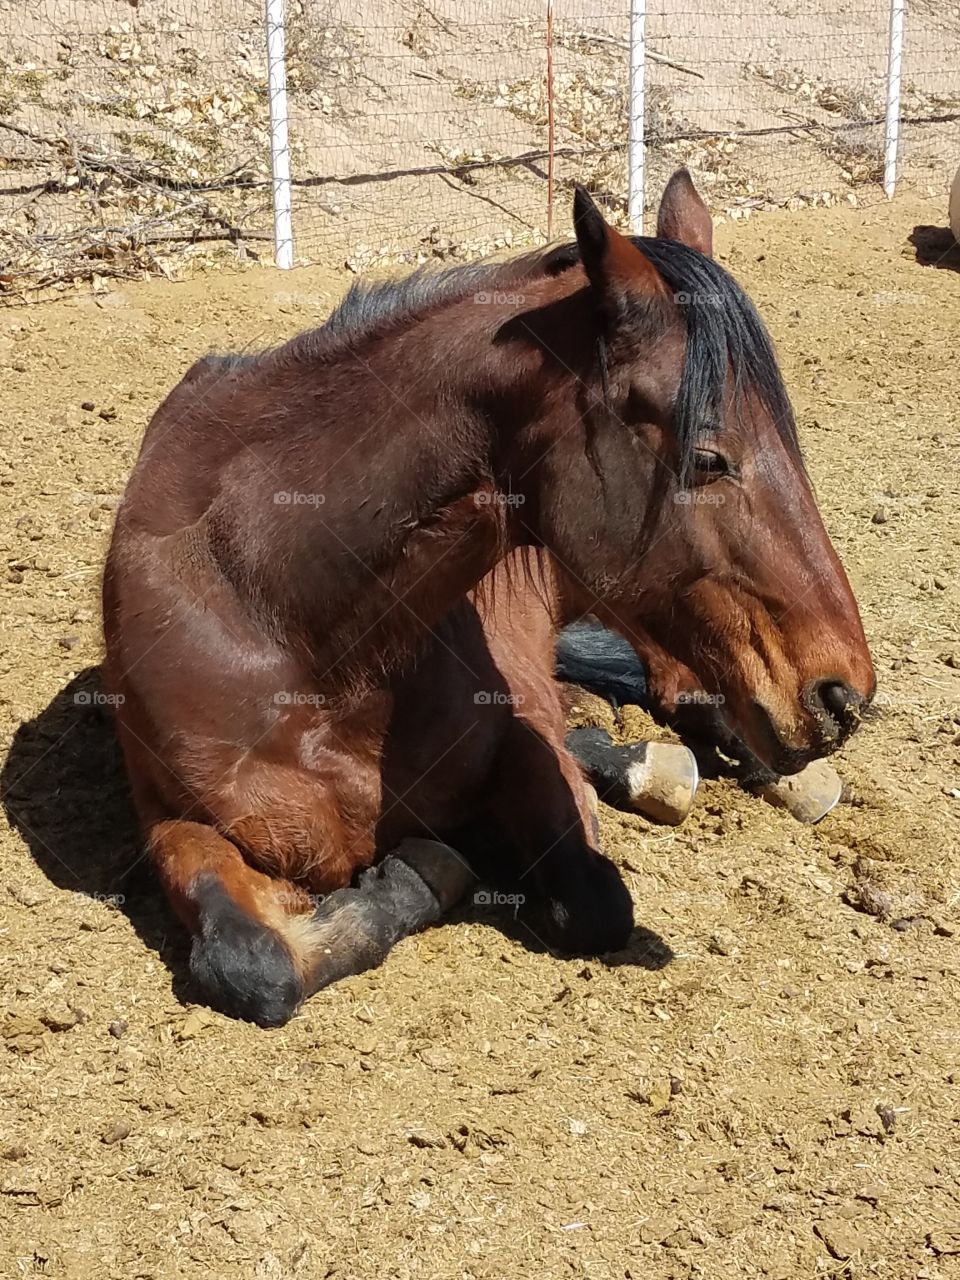 One resting horse